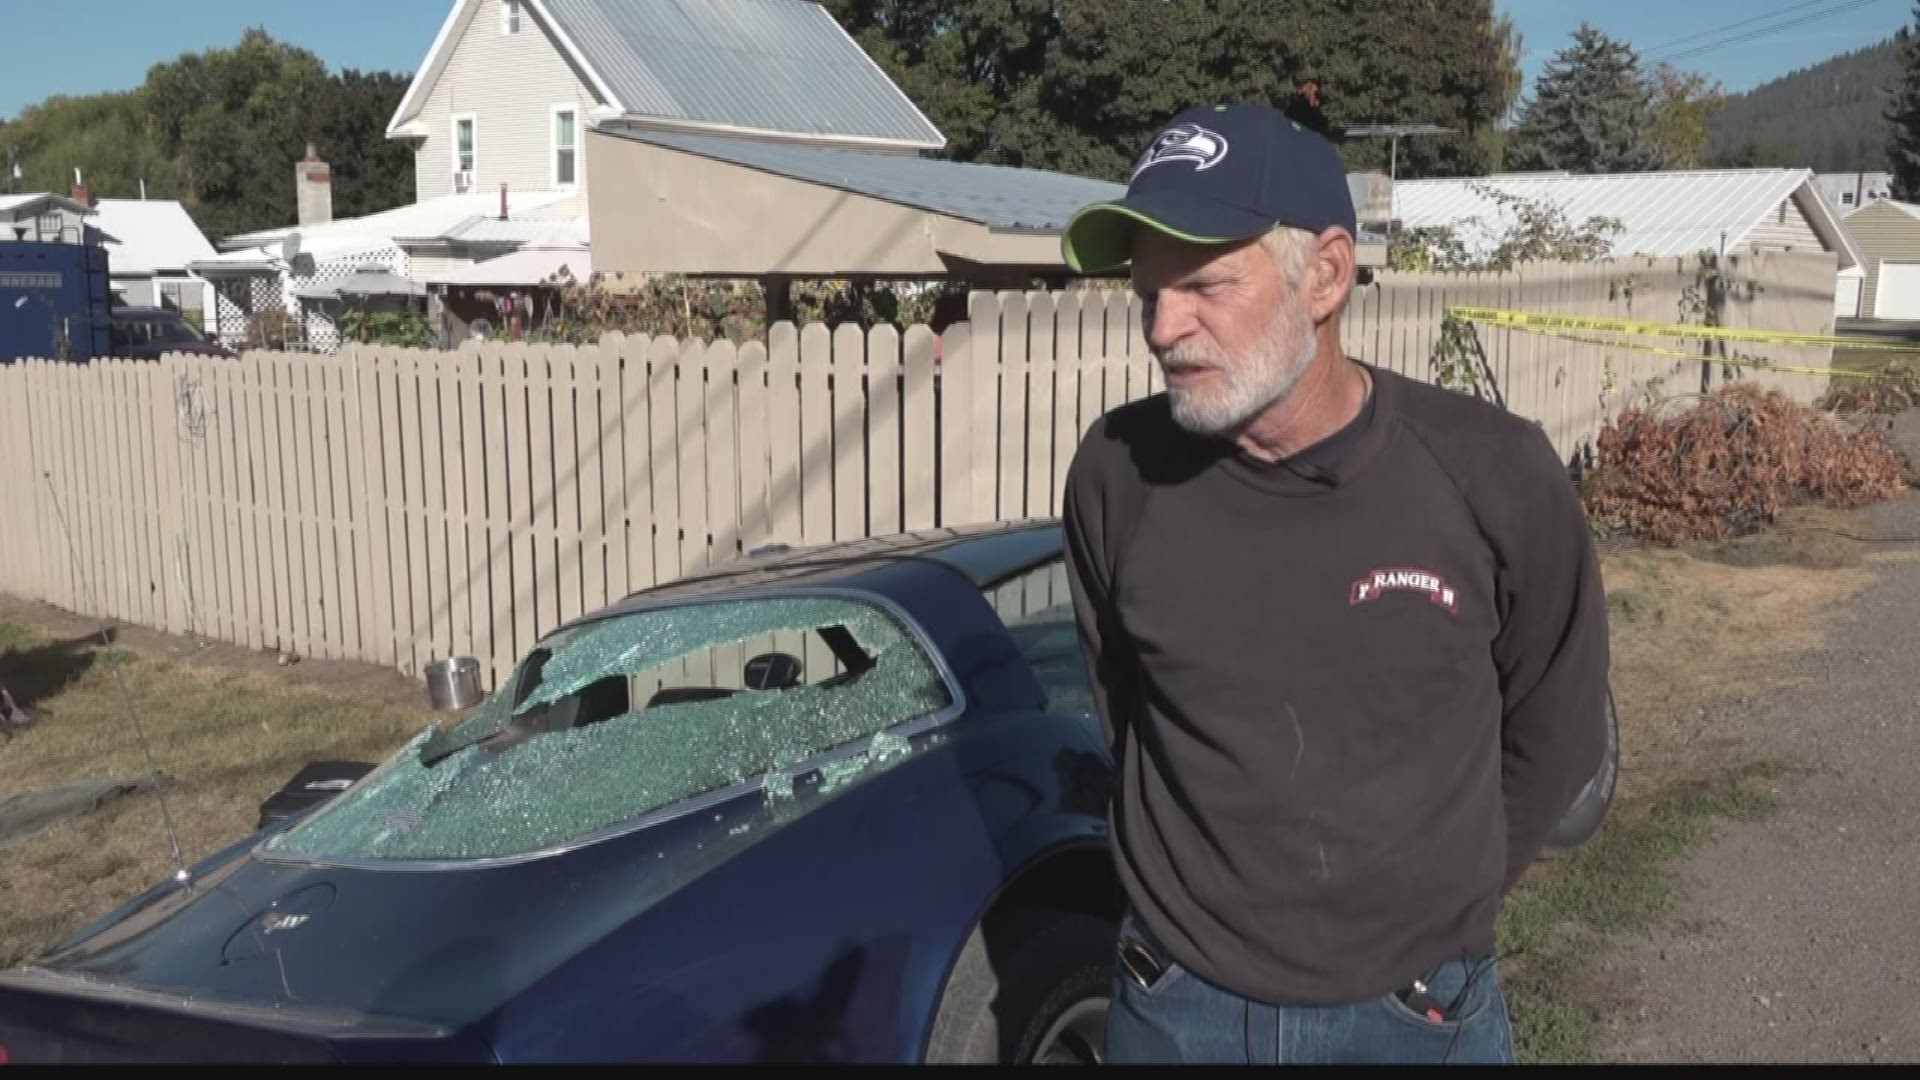 KREM 2 spoke to the owner of the car who says he's just glad things weren't worse.